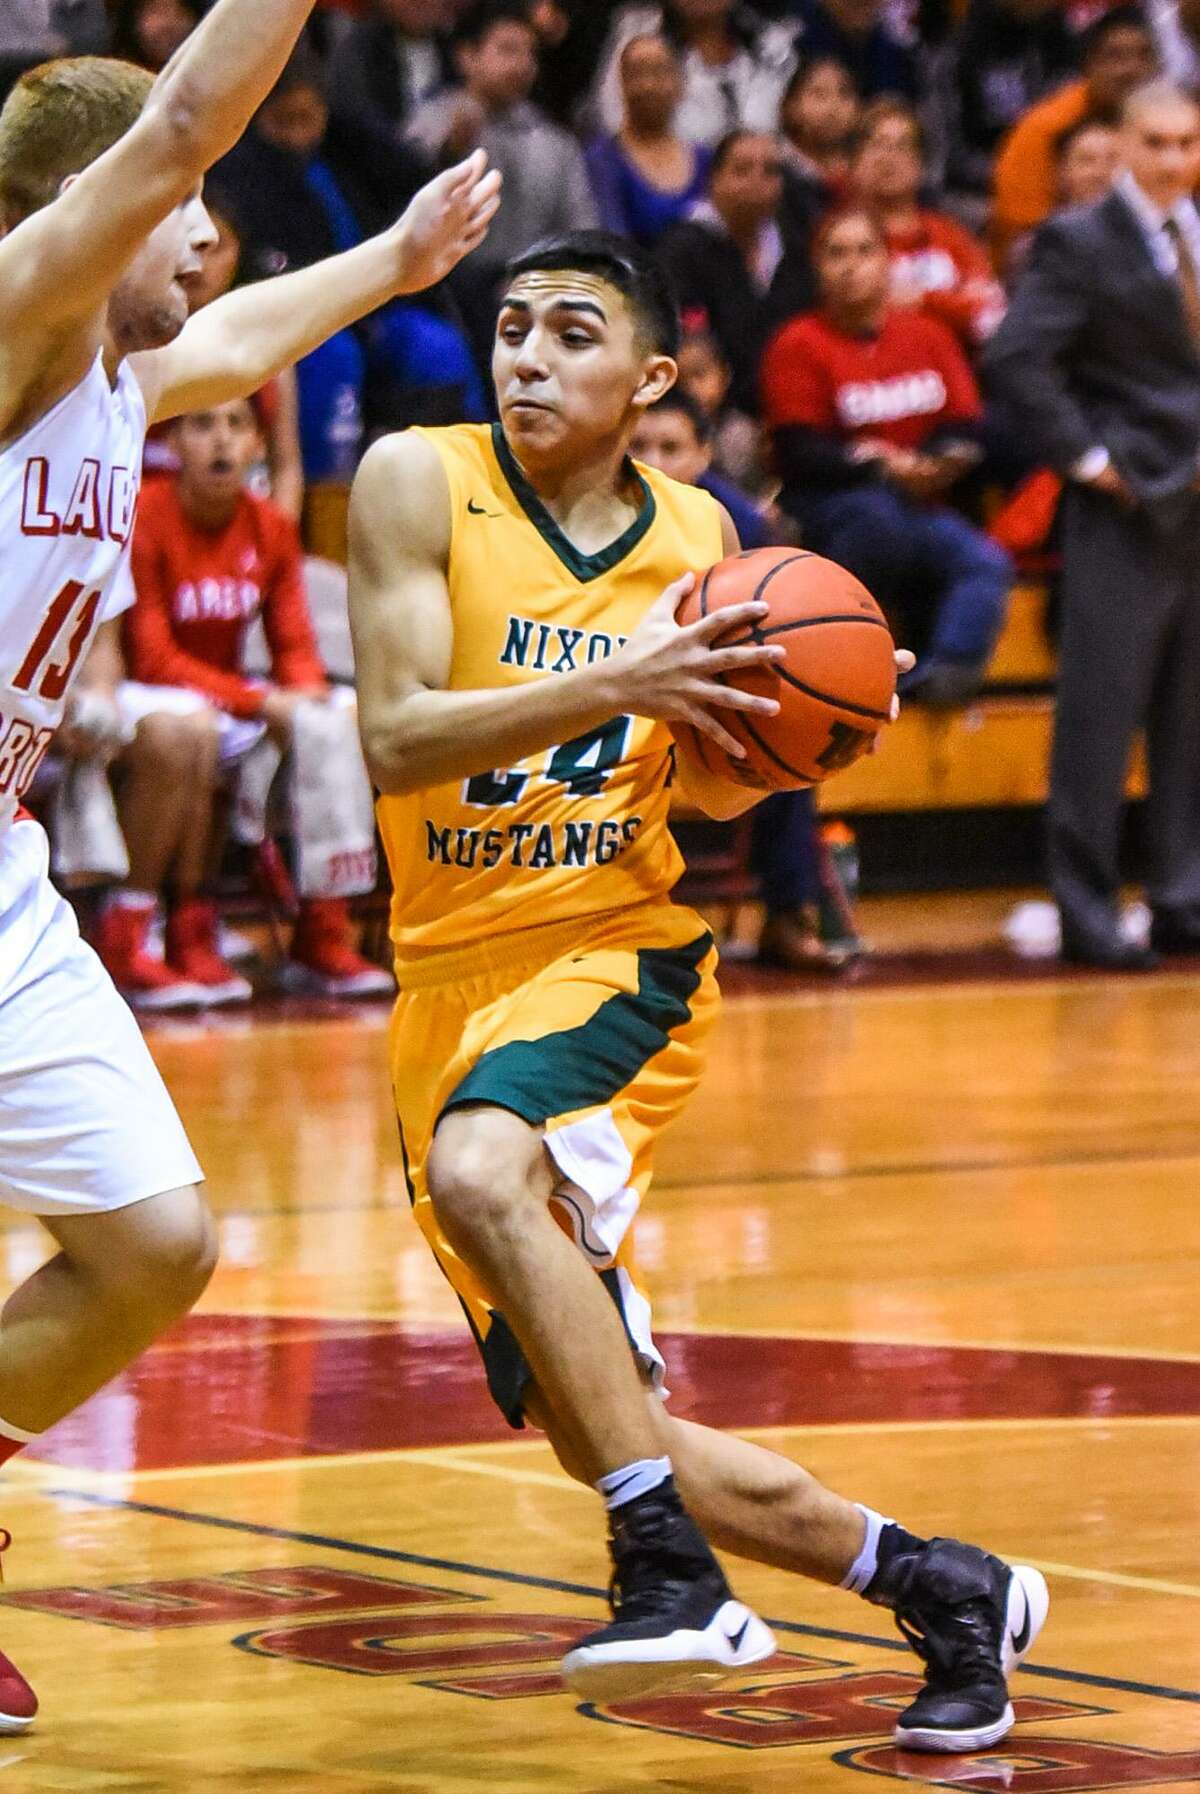 Nixon’s Rolando Ramos has come on as of late, averaging 24.2 points in his last six games.